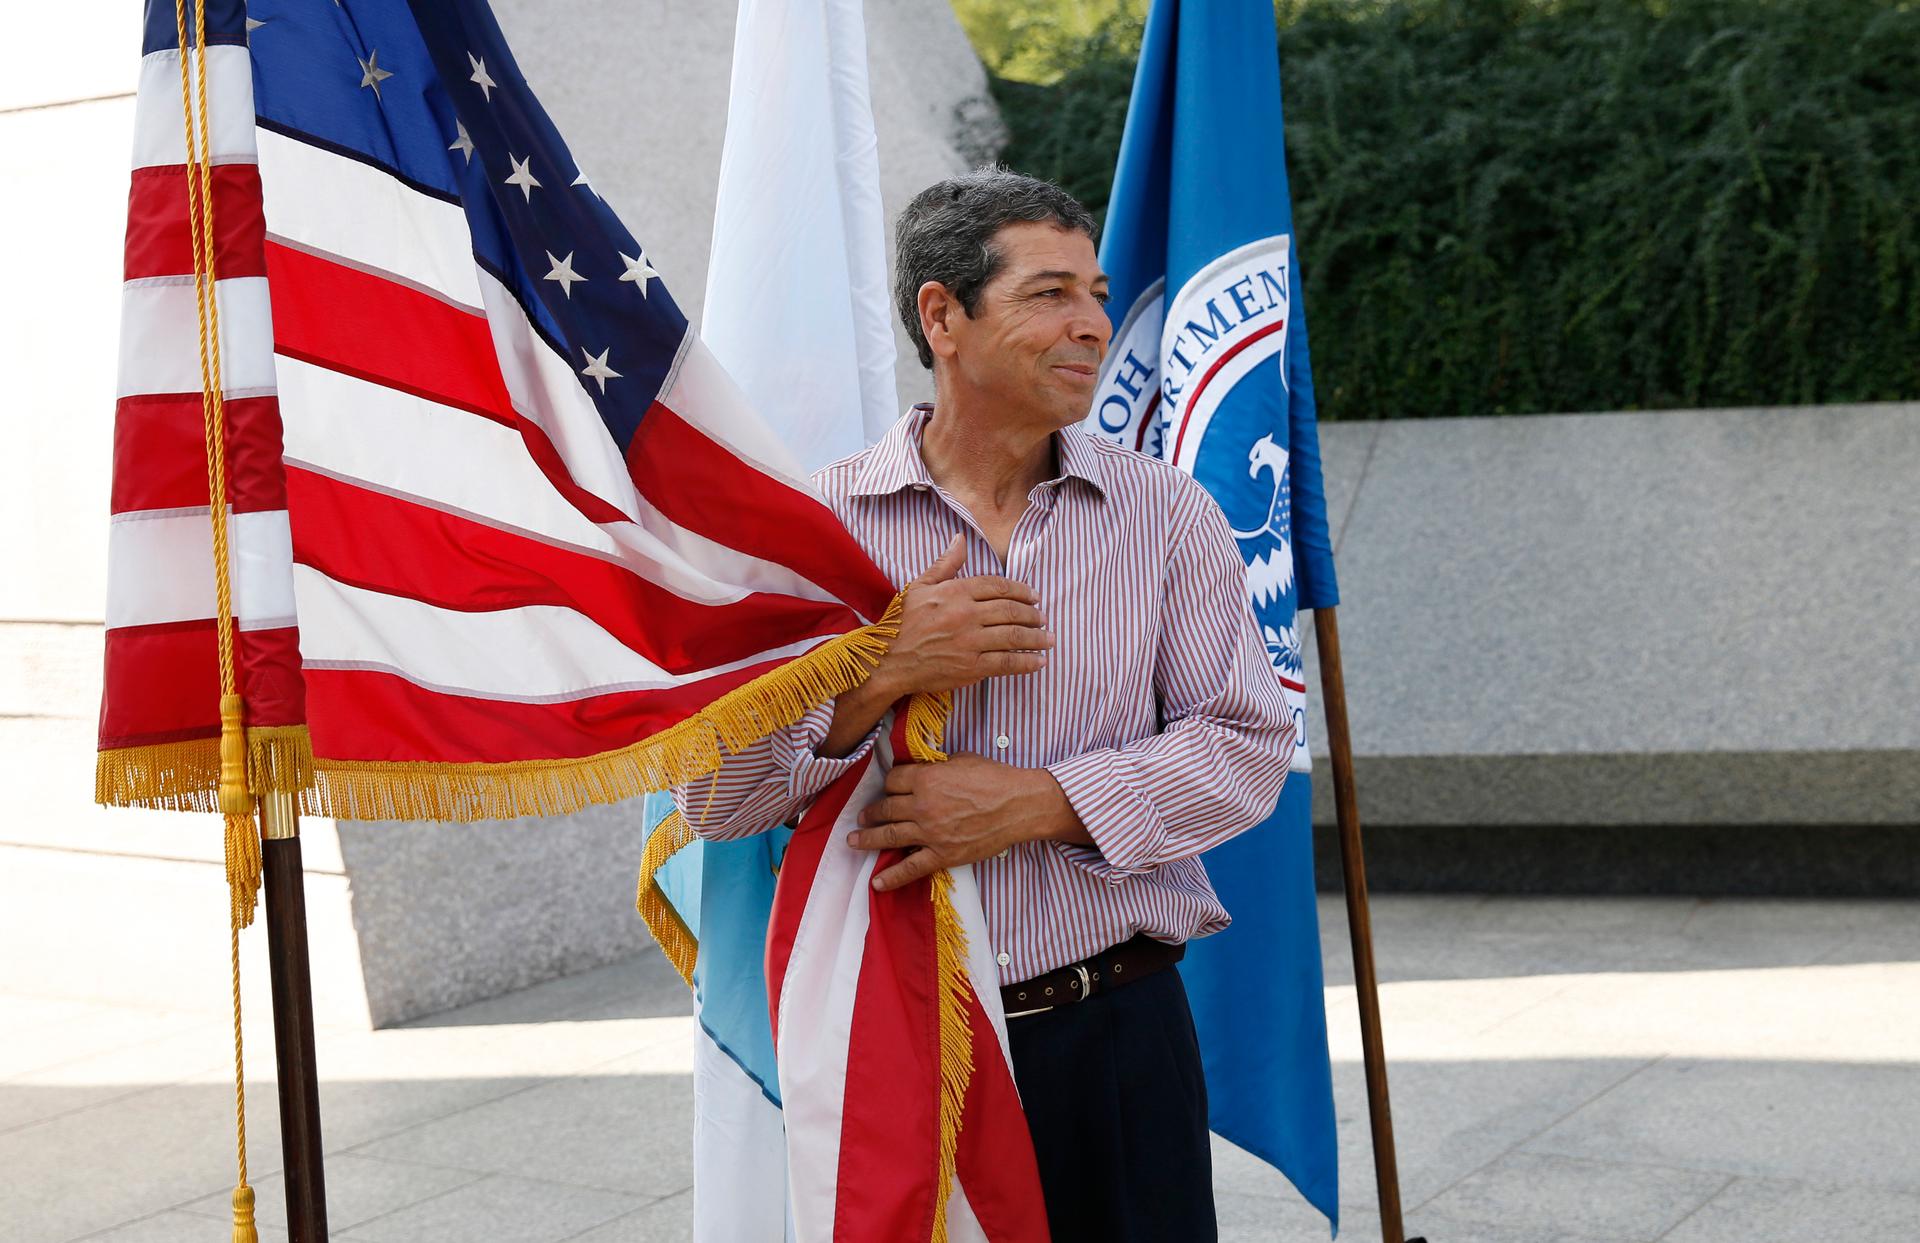 Brahim Djahra, from Algeria, clings to the Americans flag during a special naturalization ceremony held at the Martin Luther King Jr. Memorial in Washington on August 28, 2014.